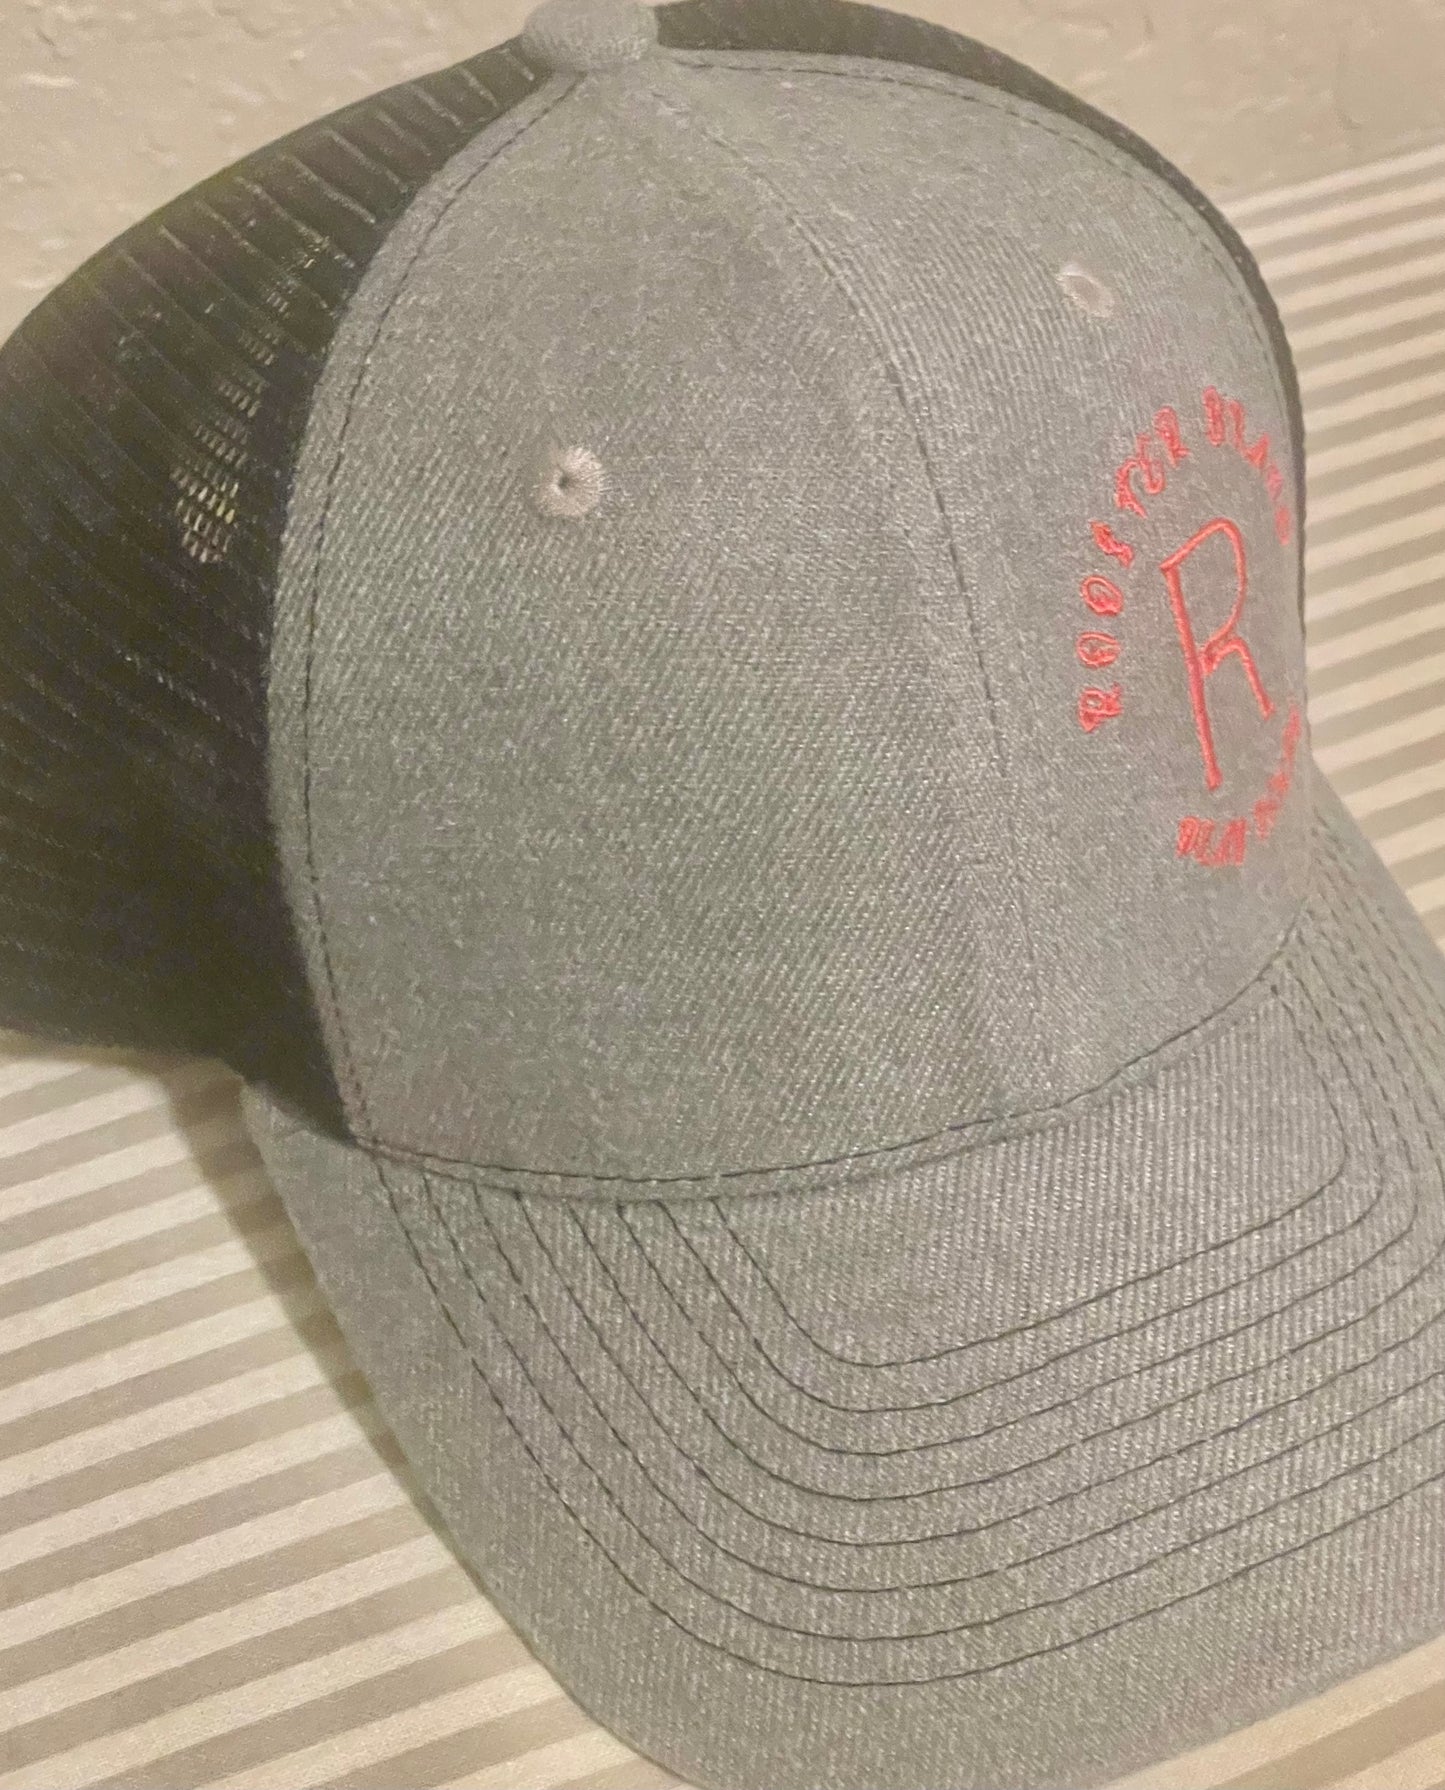 Roo$ter Brand Vented Golf Hat -  Custom Embroidered Grey/Black